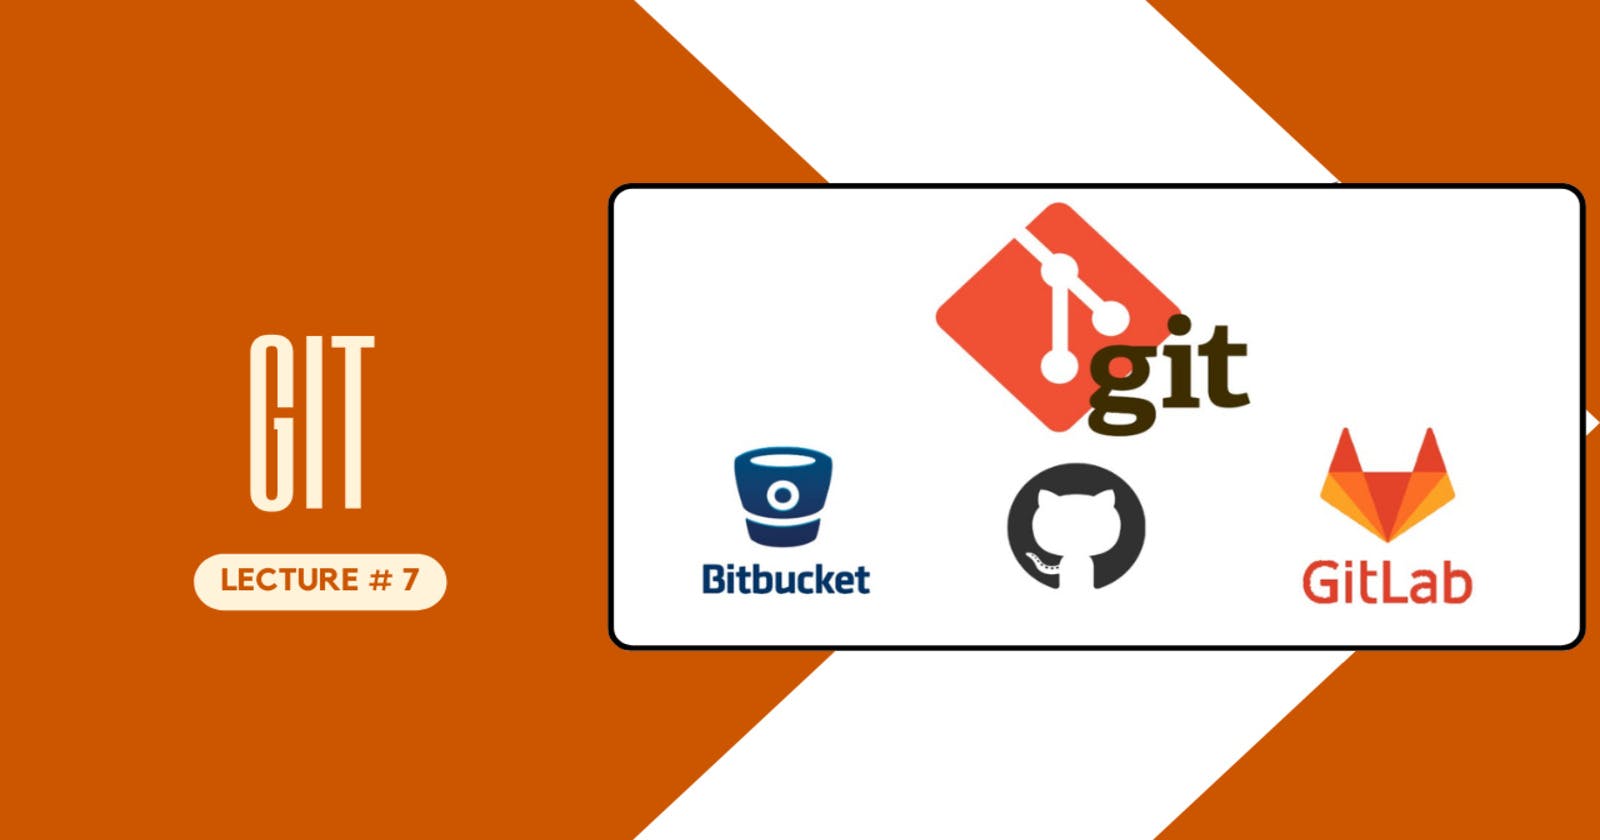 Lecture # 7 - Setup Git Repository remotely on Bitbucket